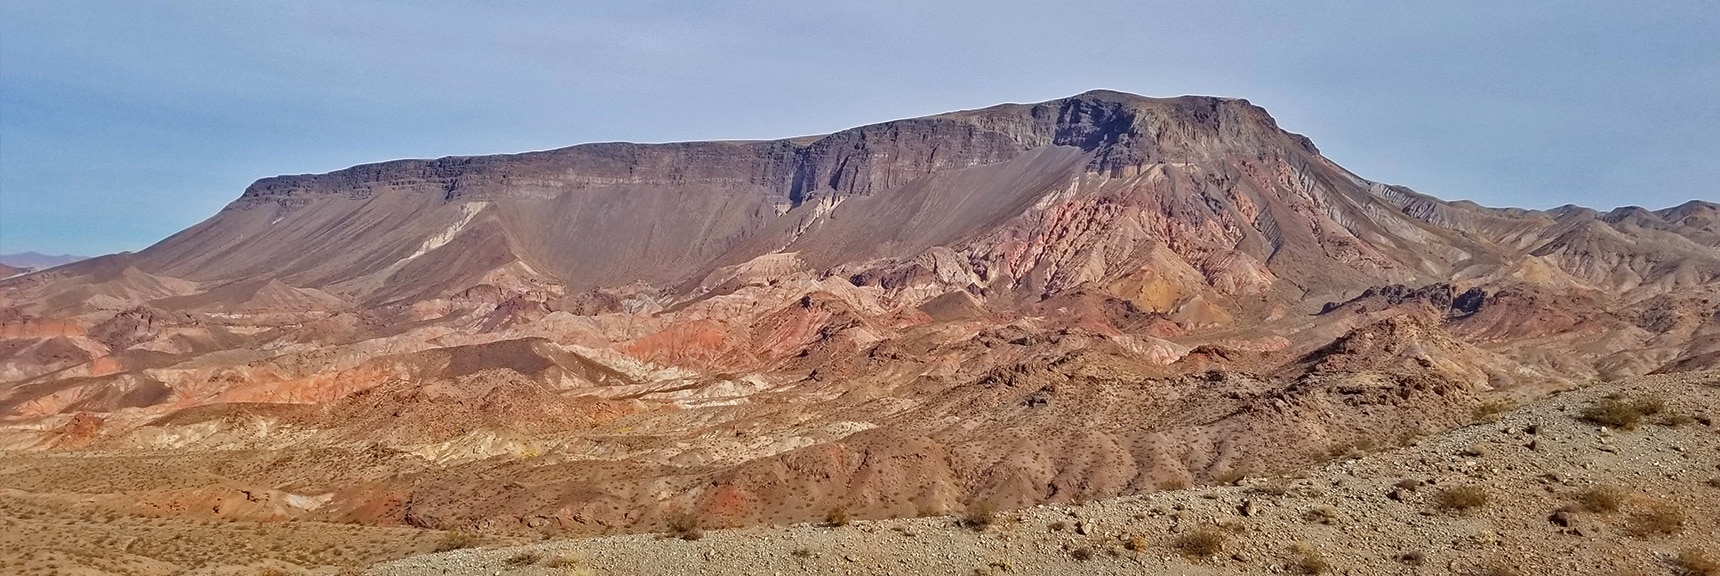 Fortification Hill Viewed from High Point on North Mine Access Road | Kingman Wash Access Road | Lake Mead National Recreation Area, Arizona